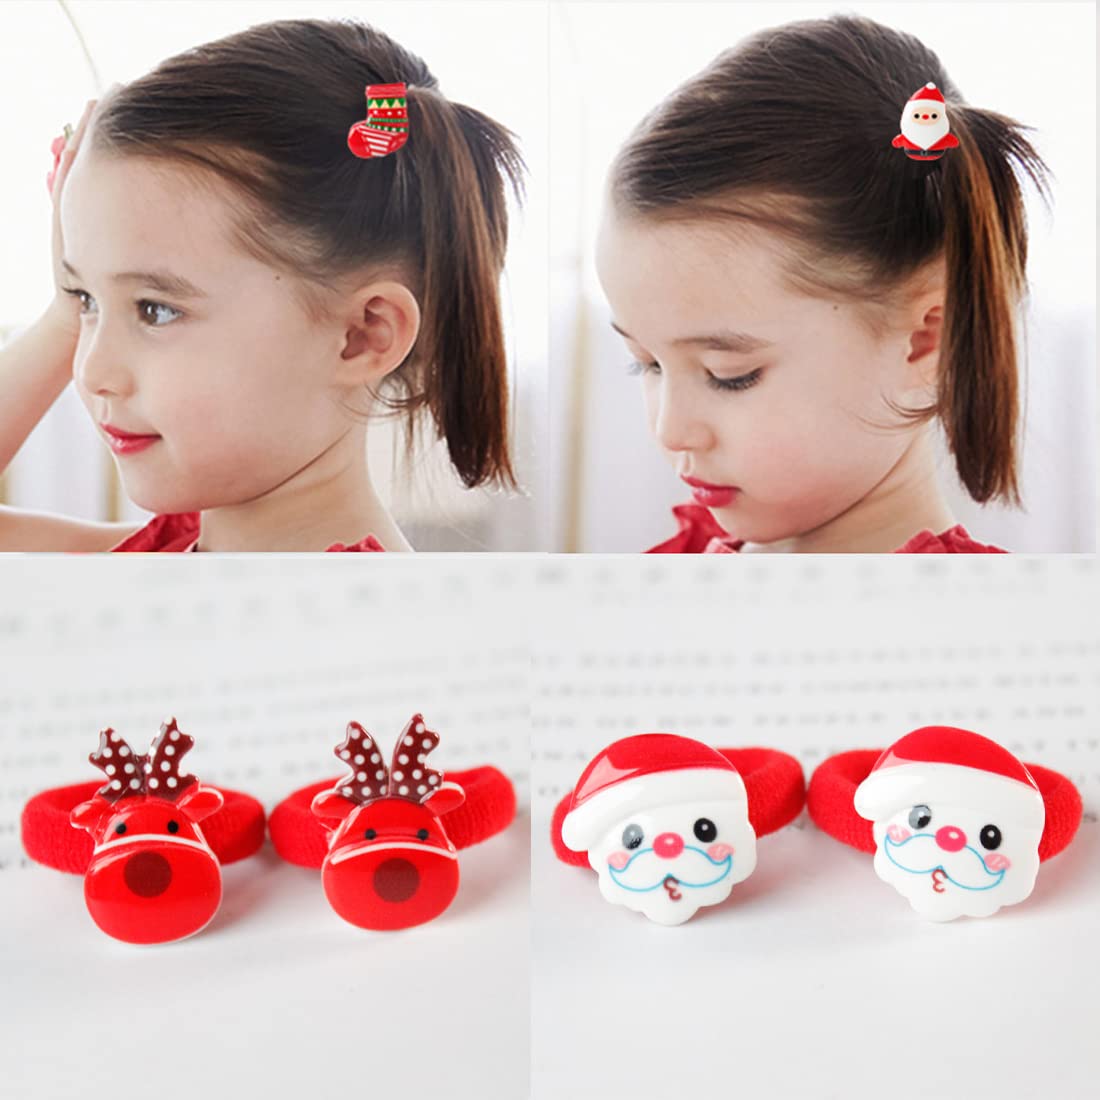 Melbees by Yellow Chimes Rubber Bands for Girls Set of 5 Pairs Rubberbands Winter Christmas Collection with Cute Characters Ponytail Holders for Kids Girls Hair Accessories